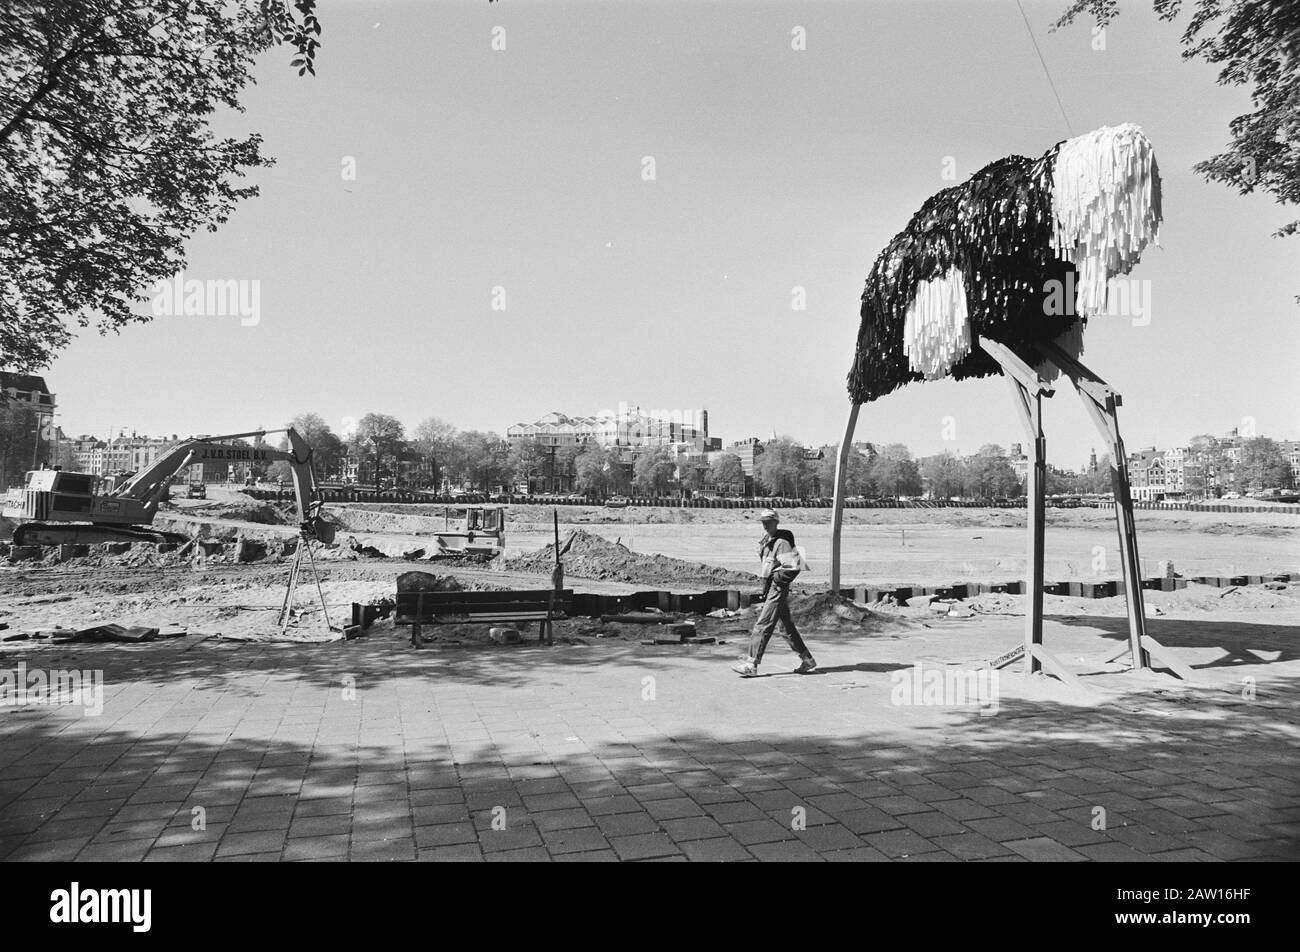 Amsterdam's Waterloo is the site preparation of the ground for the Stopera continues. A study by Dutch Theater Institute says that the operating deficit of the musical year will amount to 40 million. A piece of symbolism in Waterloo, a giant ostrich with its head in the sand, while the preparations for construction in full swing Date: May 14, 1982 Location: Amsterdam, Noord-Holland Keywords: construction, artwork, protests Stock Photo